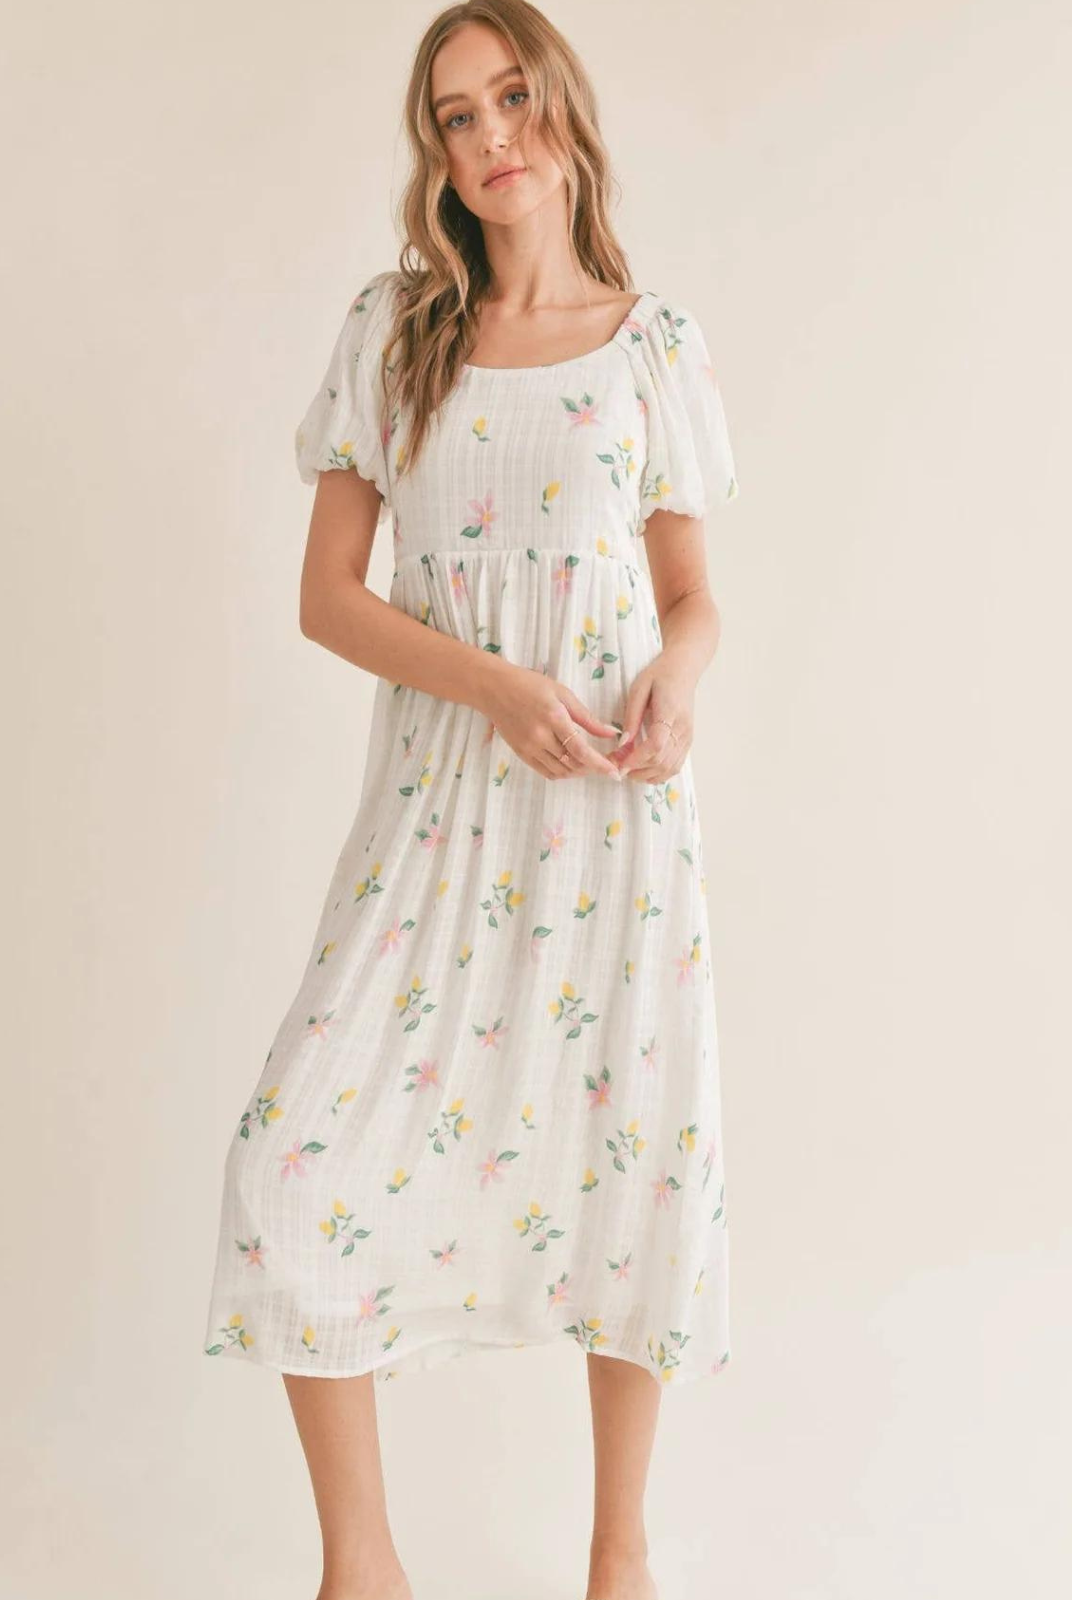 Sadie & Sage Spring Cleaning Midi Dress. Get ready to twirl into spring with our darling Spring Cleaning Midi Dress! With perfect spring garden vibes, this dress is&nbsp; an absolute delight to wear wherever you go. Say yes to this dress and add a touch of playful and quirky charm to your wardrobe!